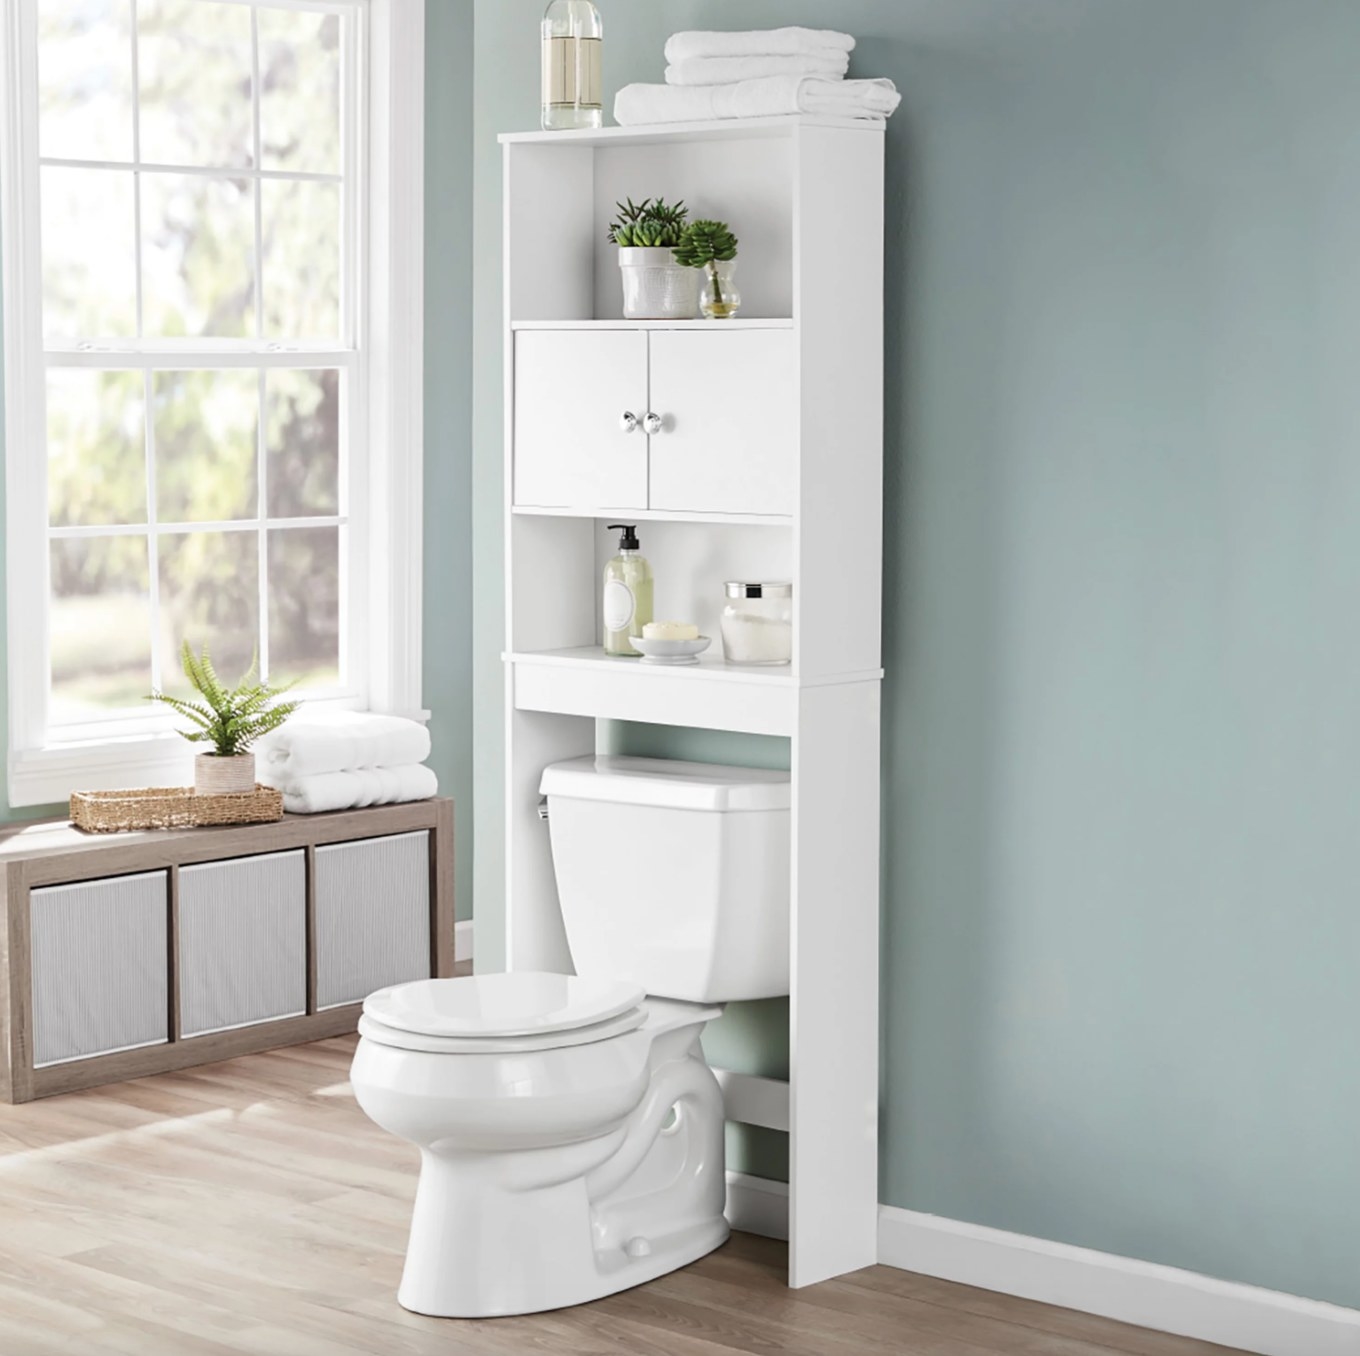 the white cabinet over a toilet in a decorated bathroom space